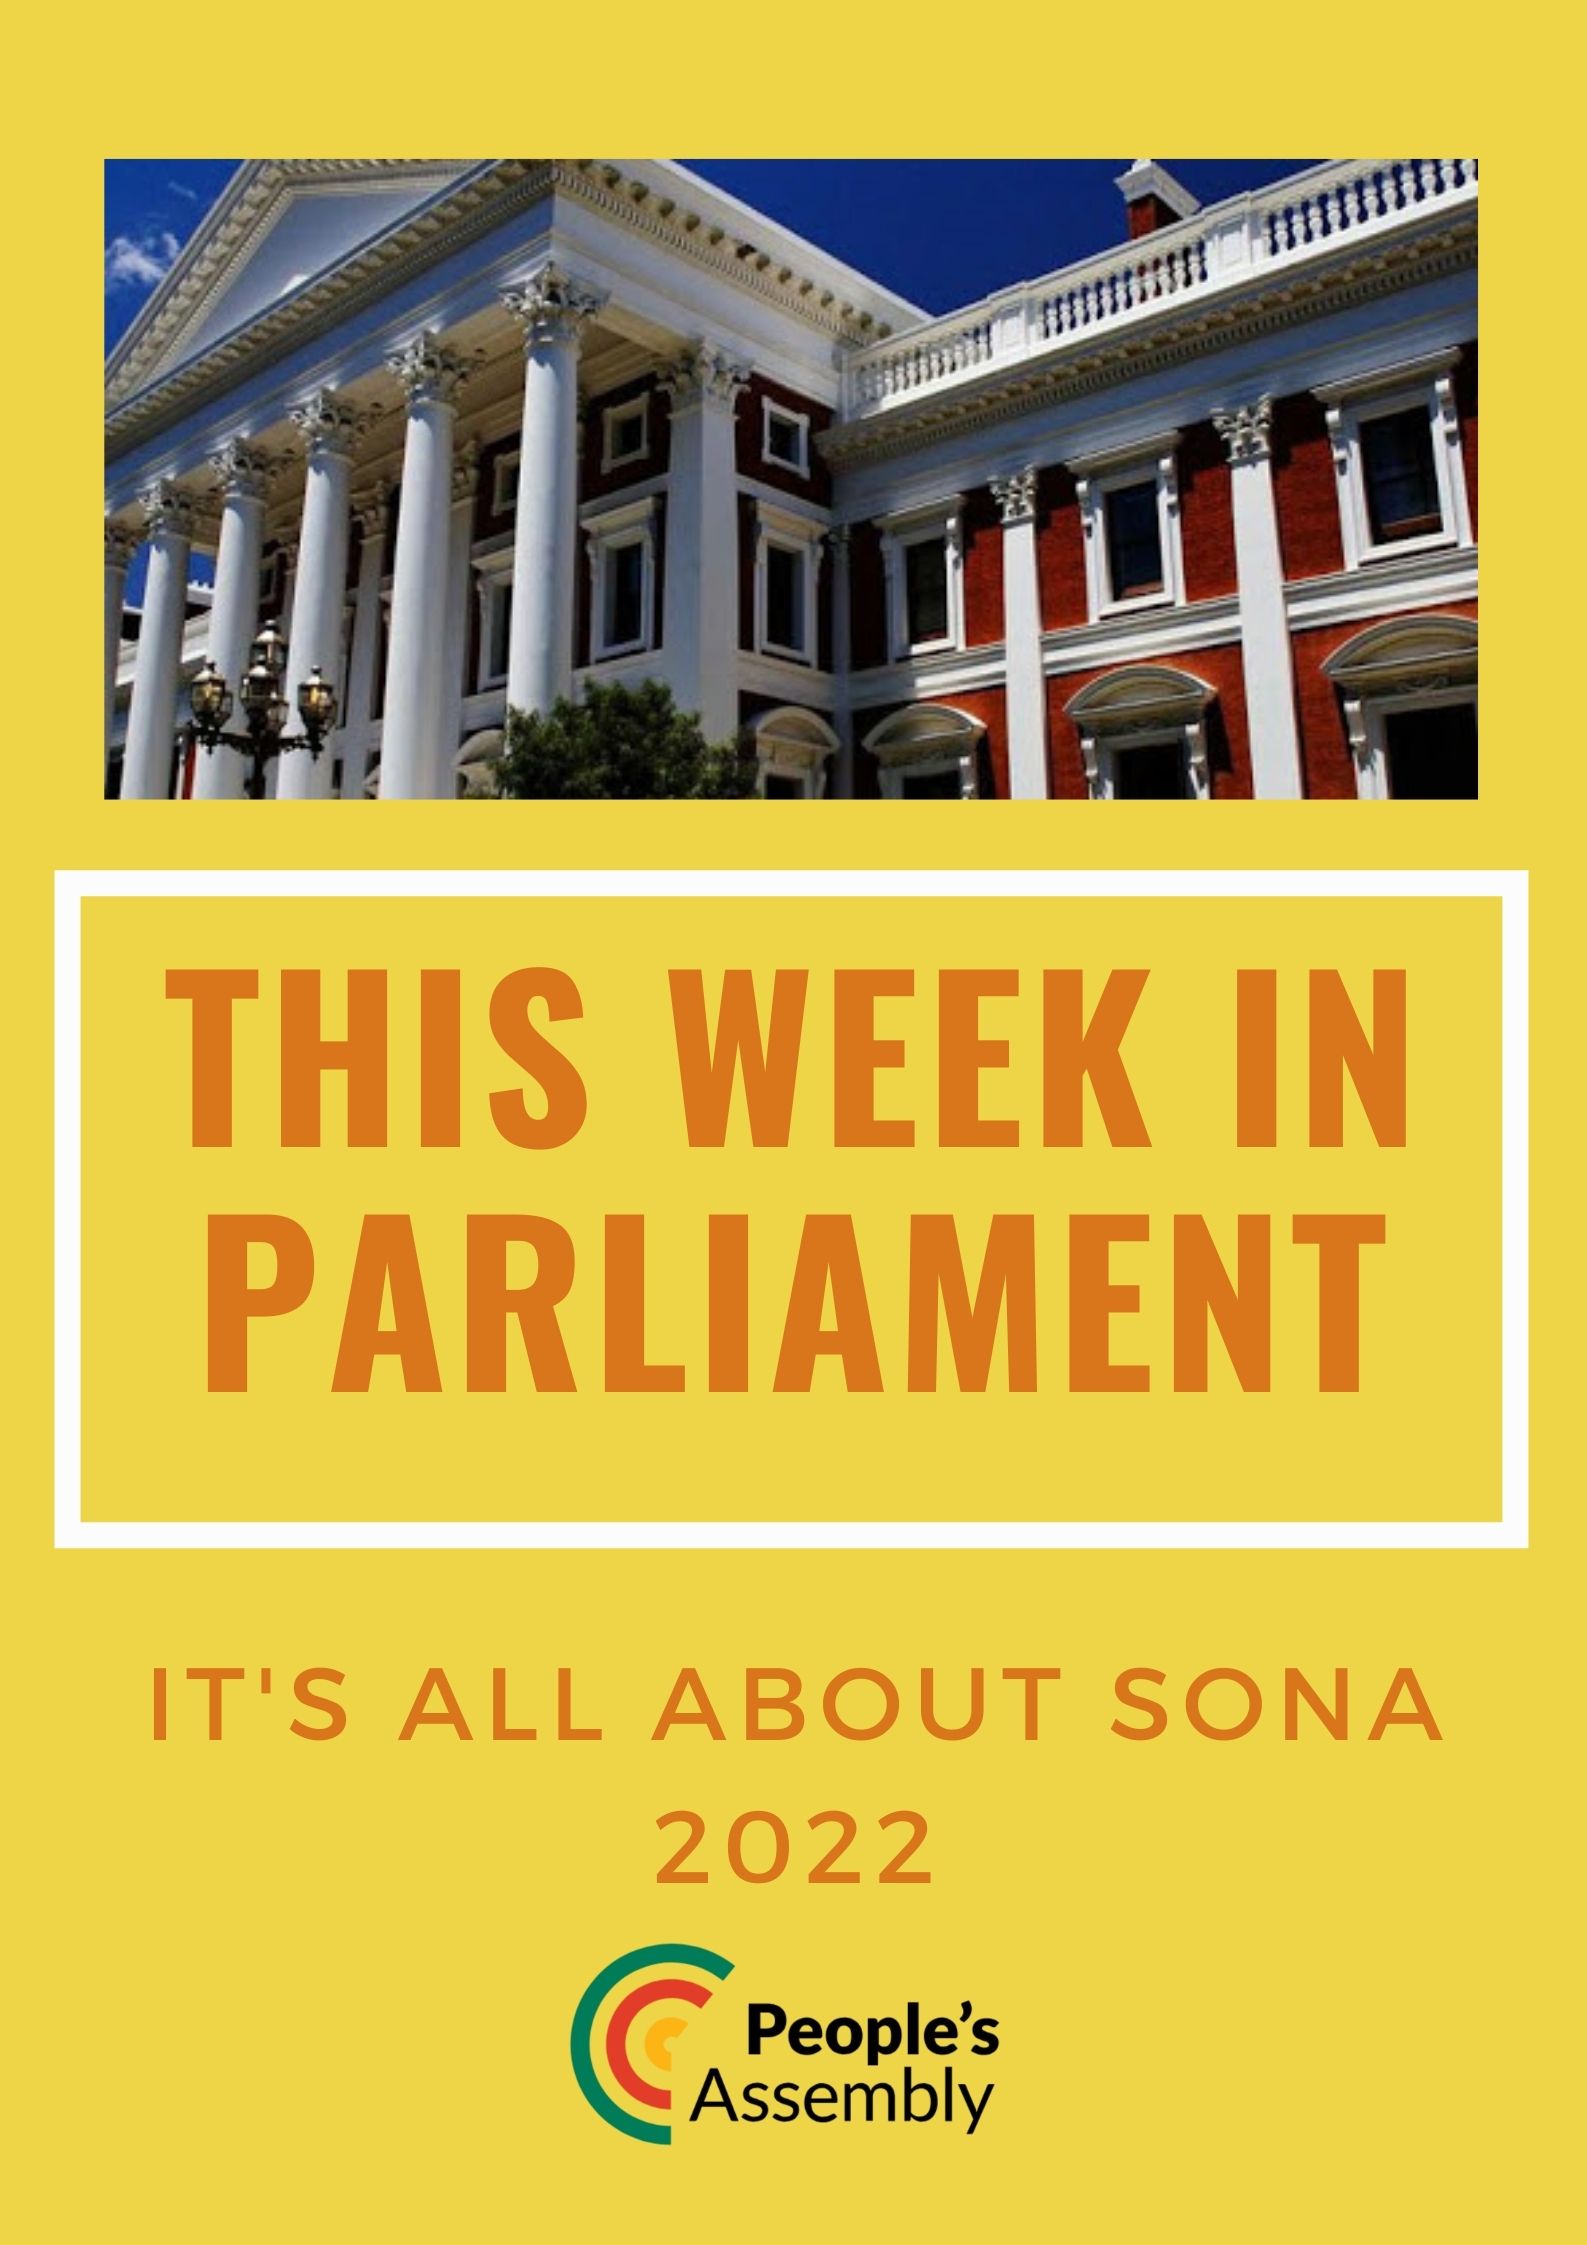 https://www.pa.org.za/media_root/file_archive/this_week_in_parliament1.jpg